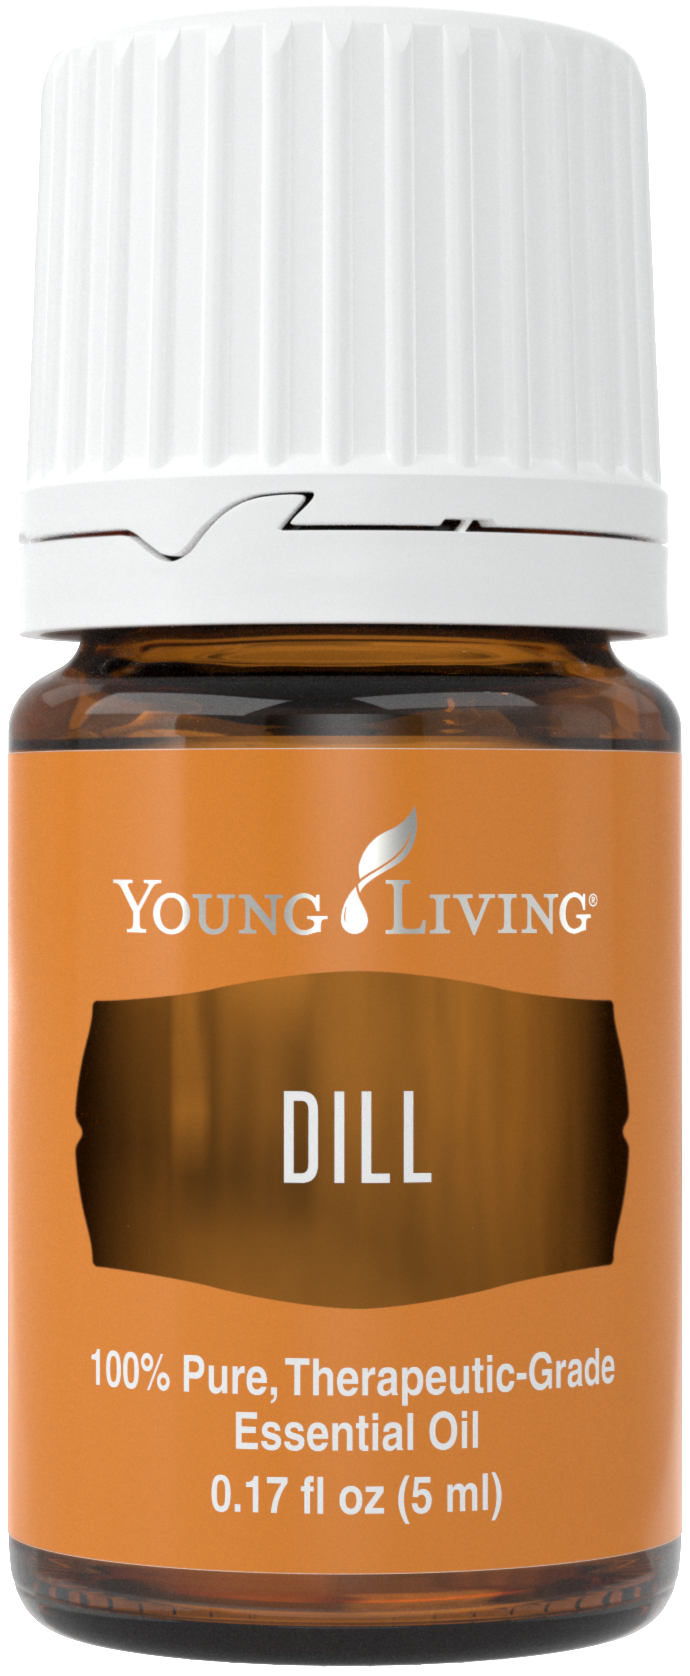 Dill 5ml Silo.png